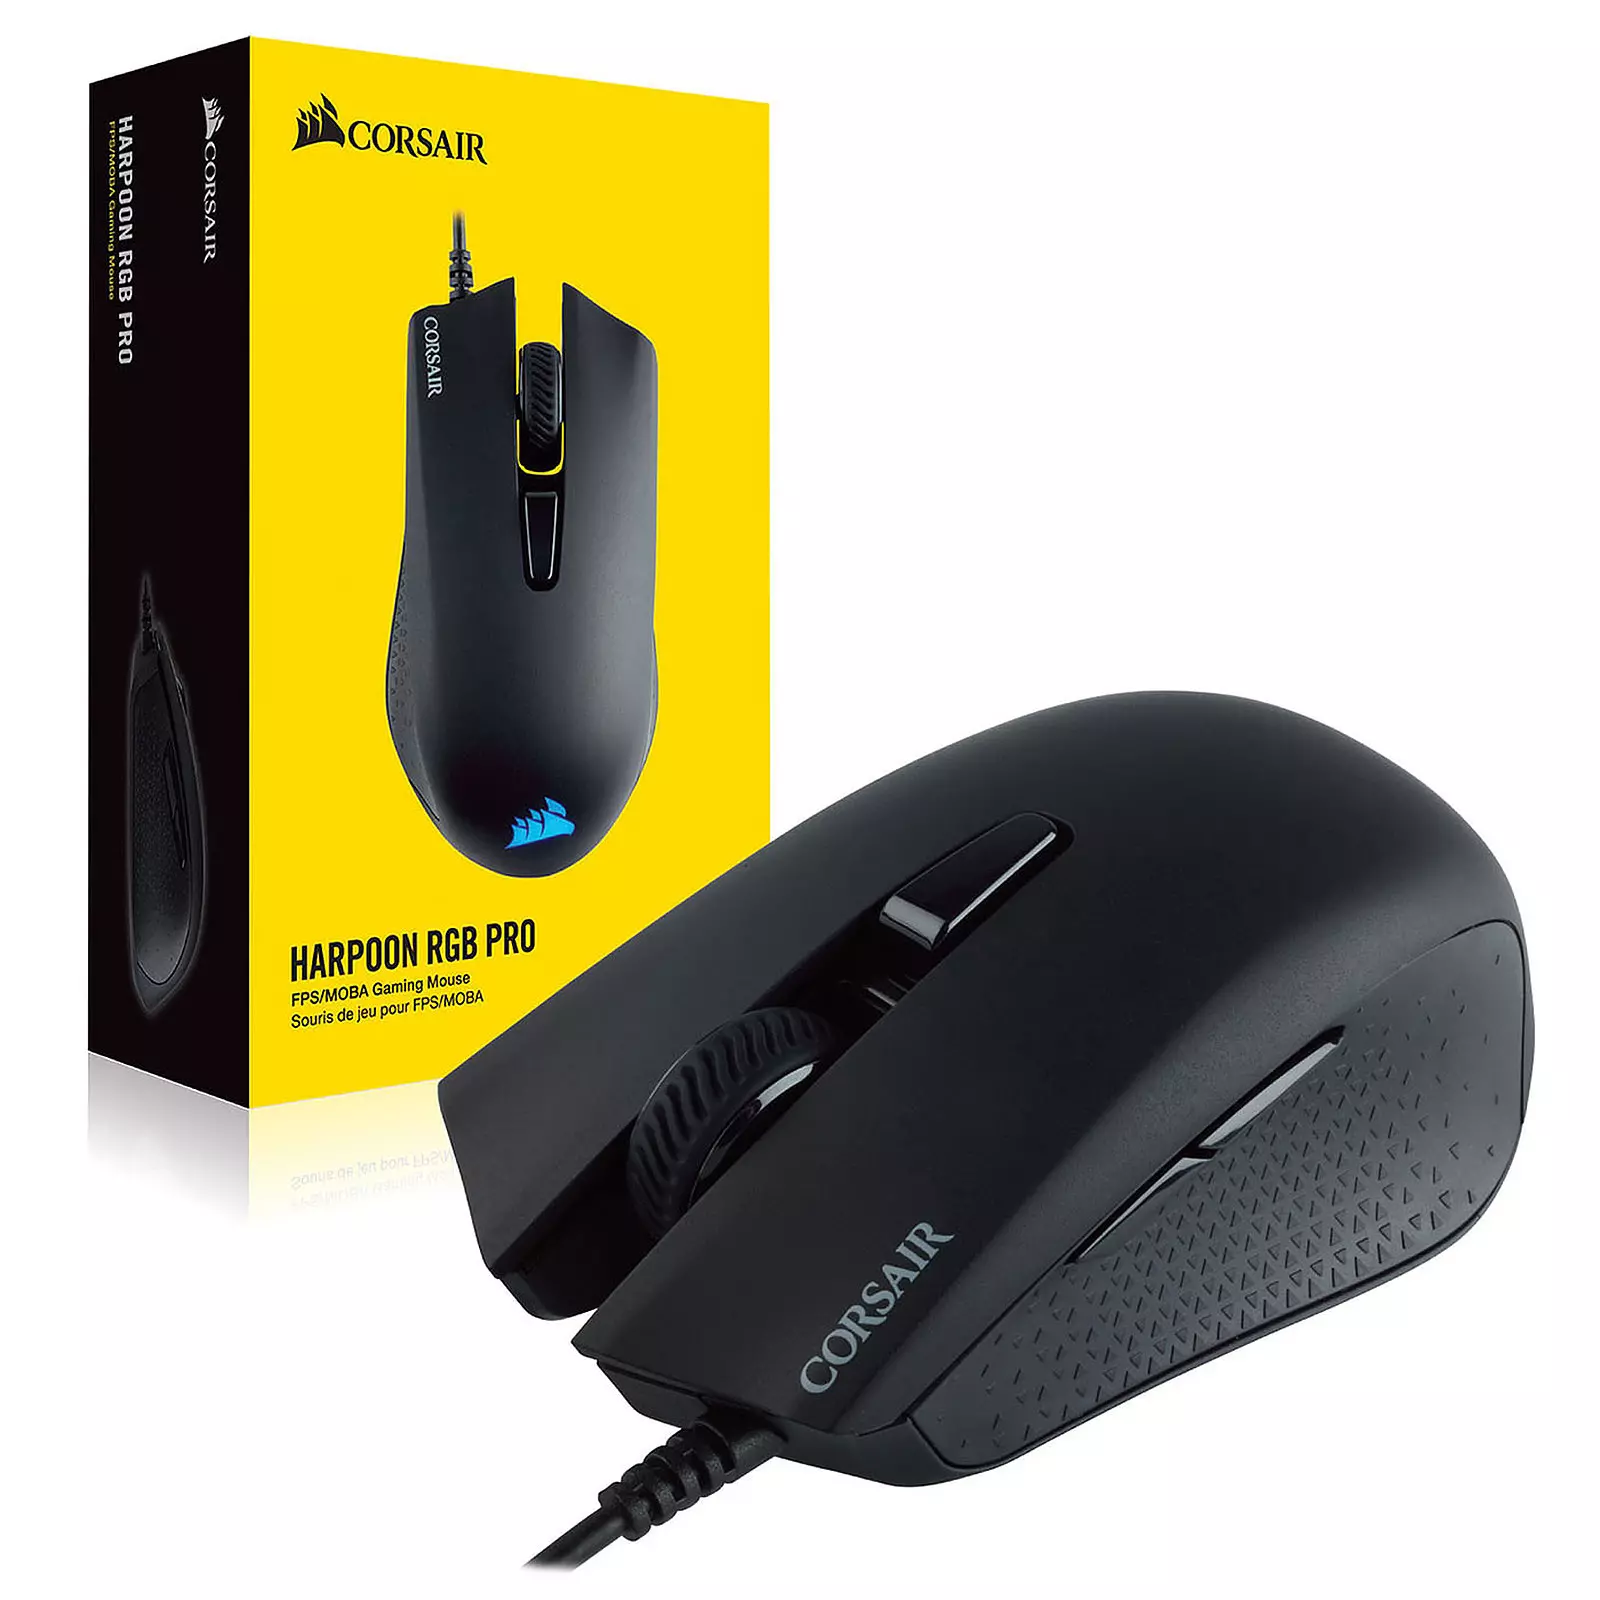 Ergonomically designed gaming mouse with non-slip rubber sides